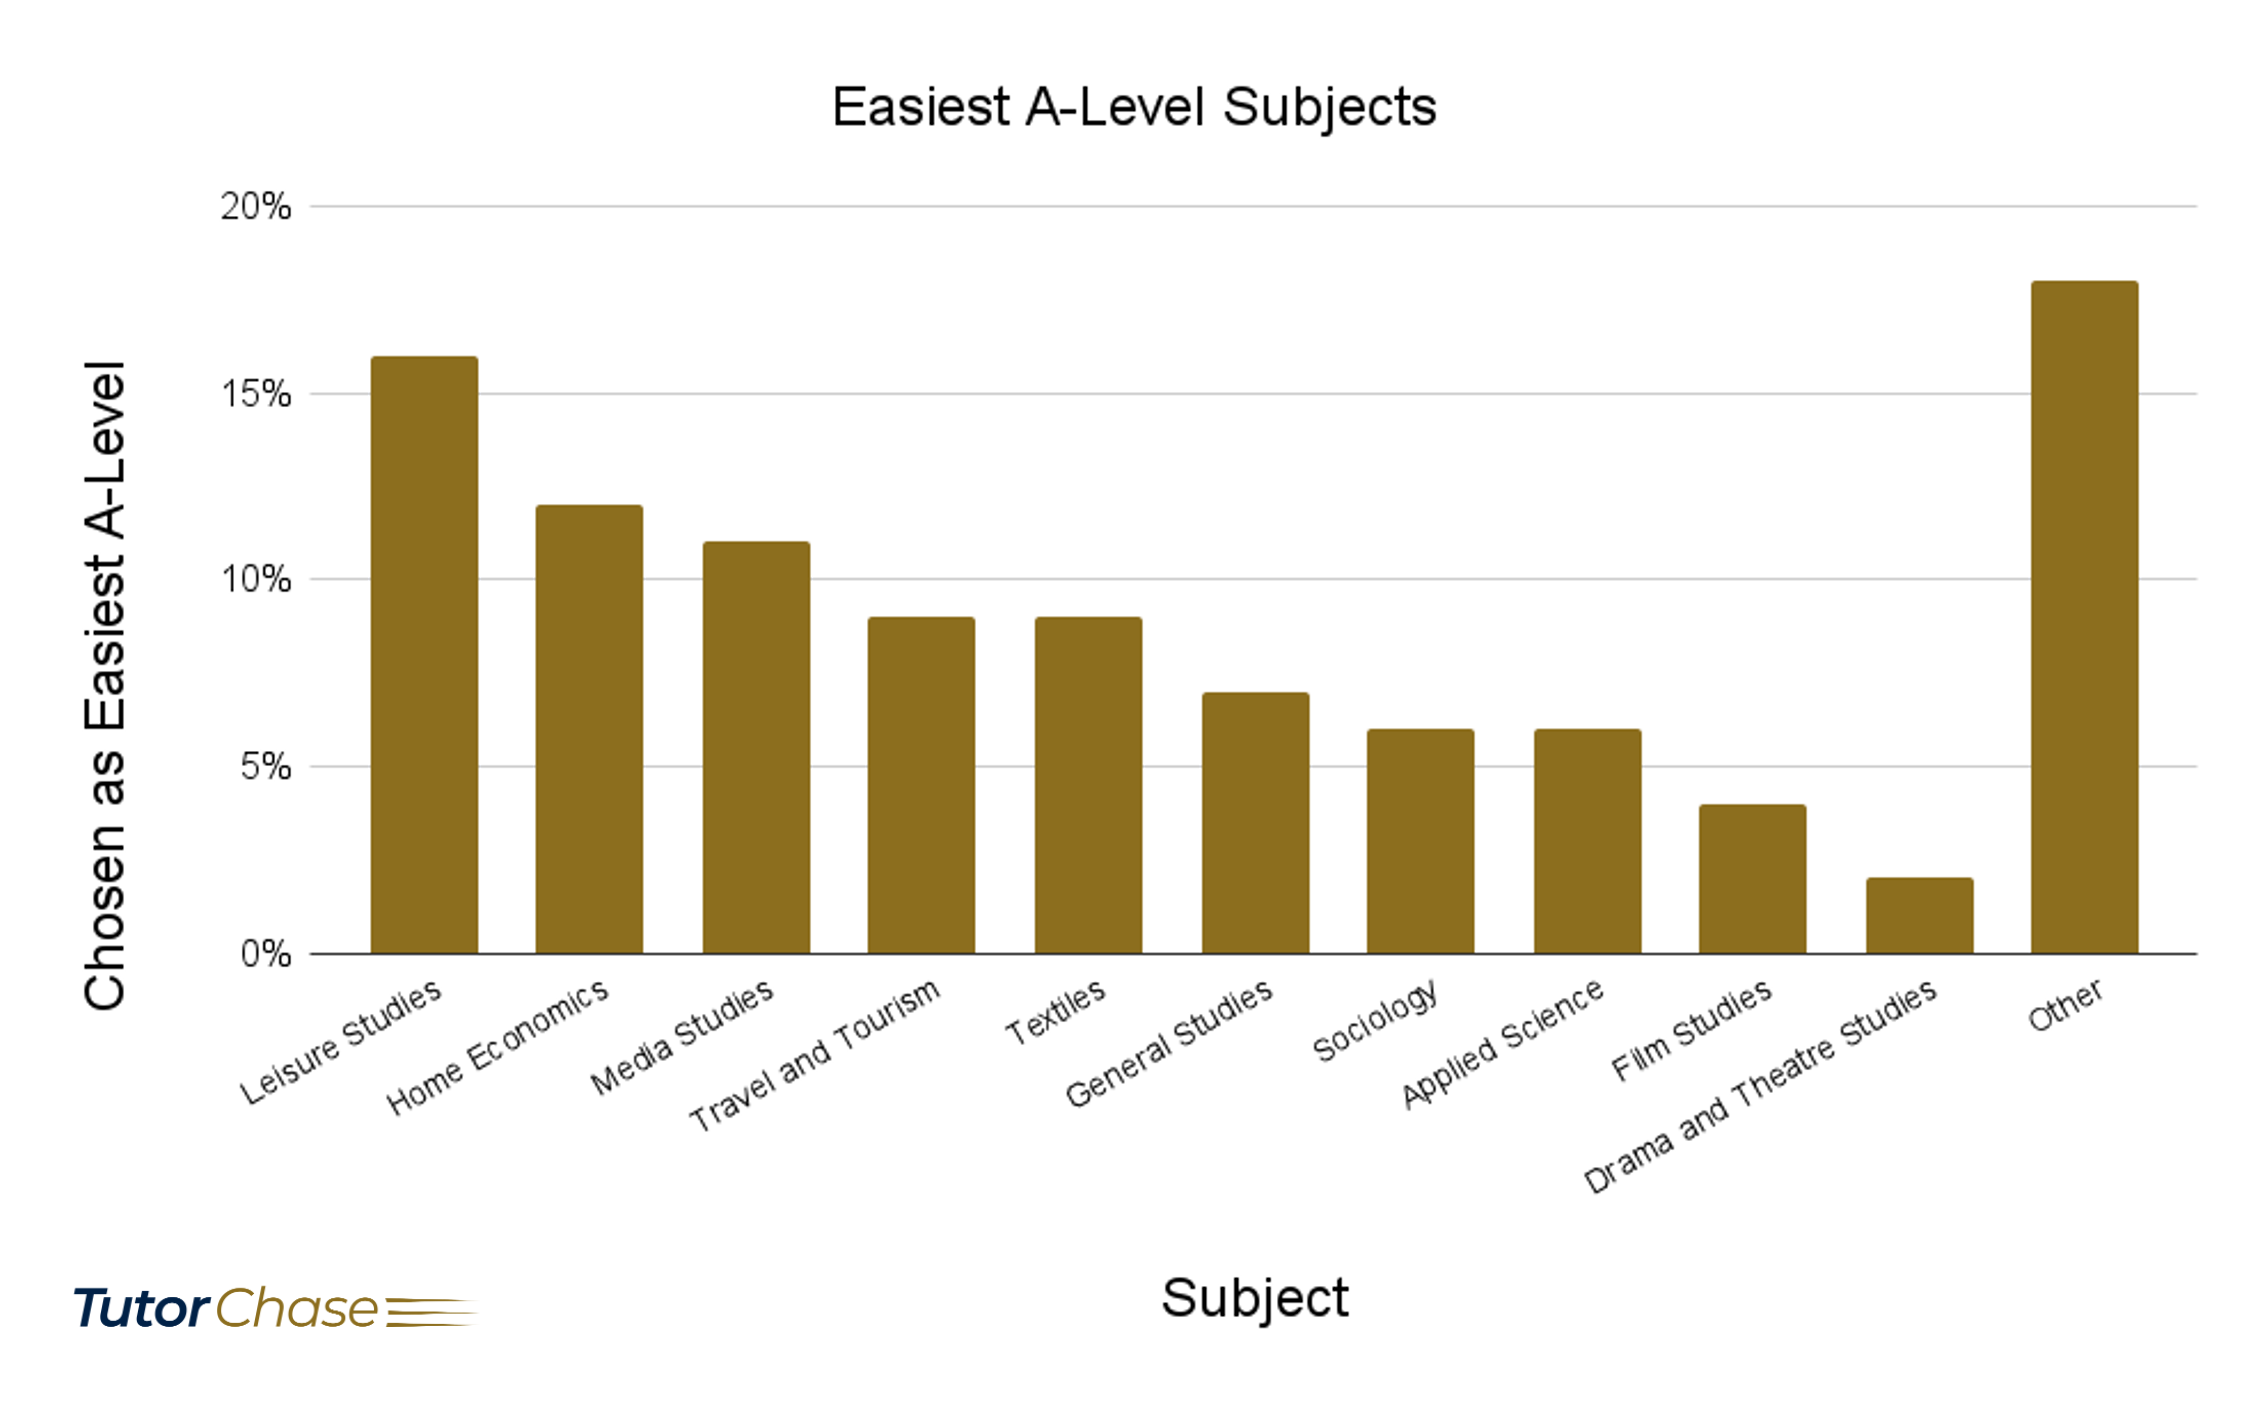 Survey of easiest A-Level subjects answered by teachers and lecturers